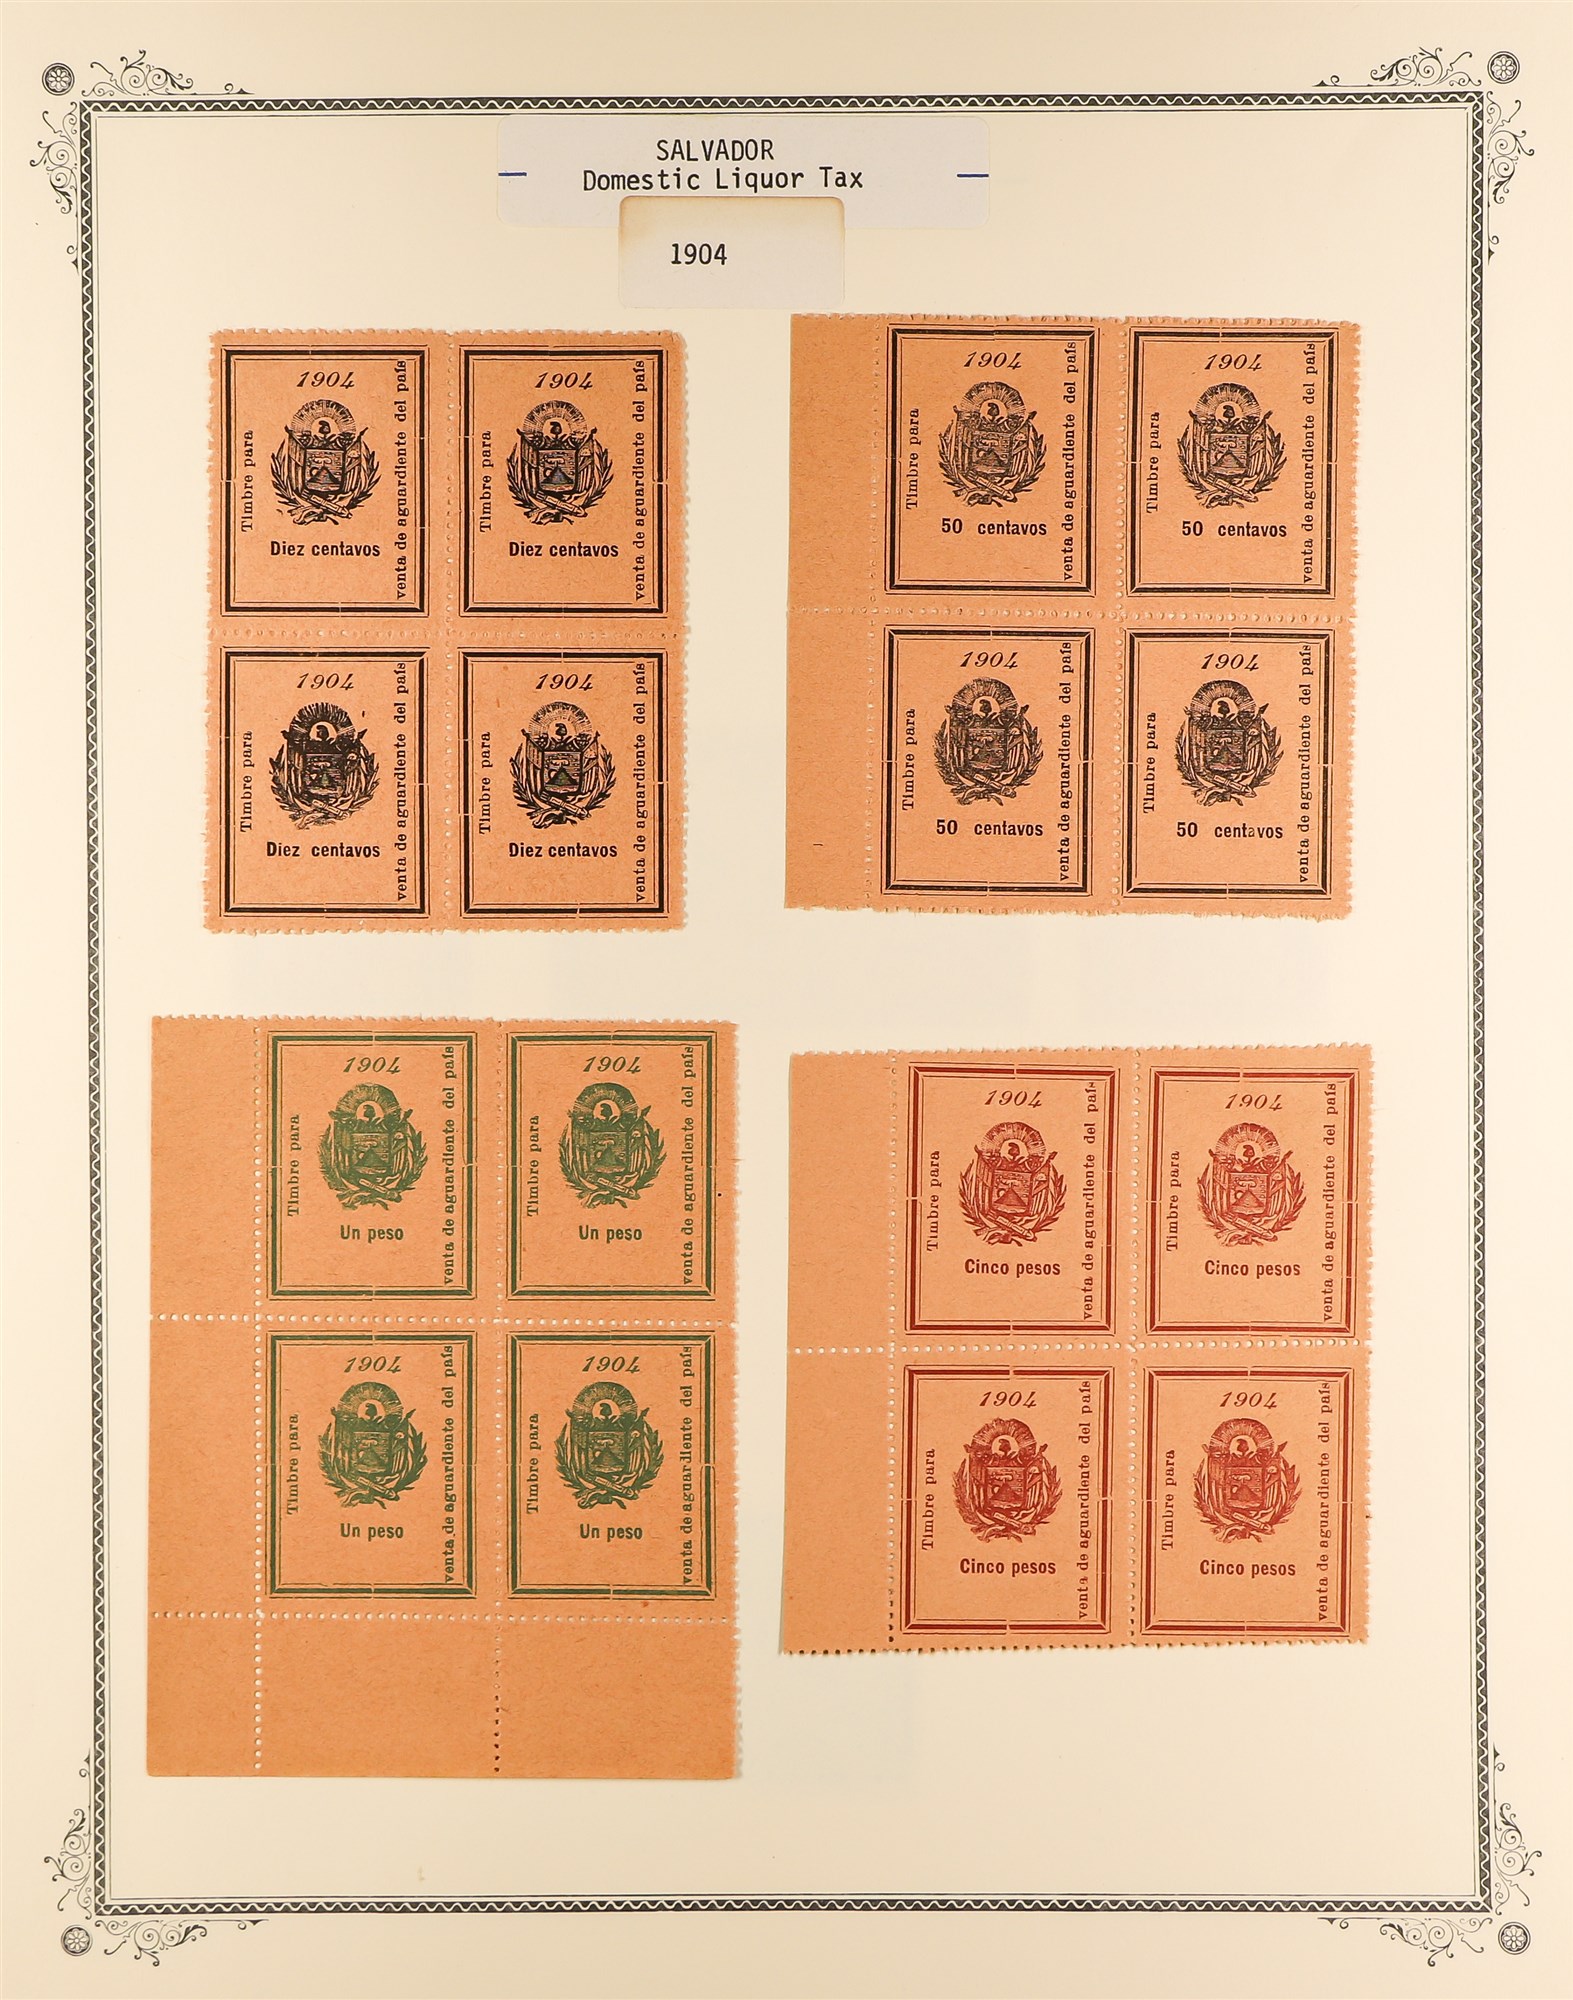 EL SALVADOR REVENUE STAMPS 1883 - 1925 mint & used collection of over 400 revenue stamps, on album - Image 10 of 27